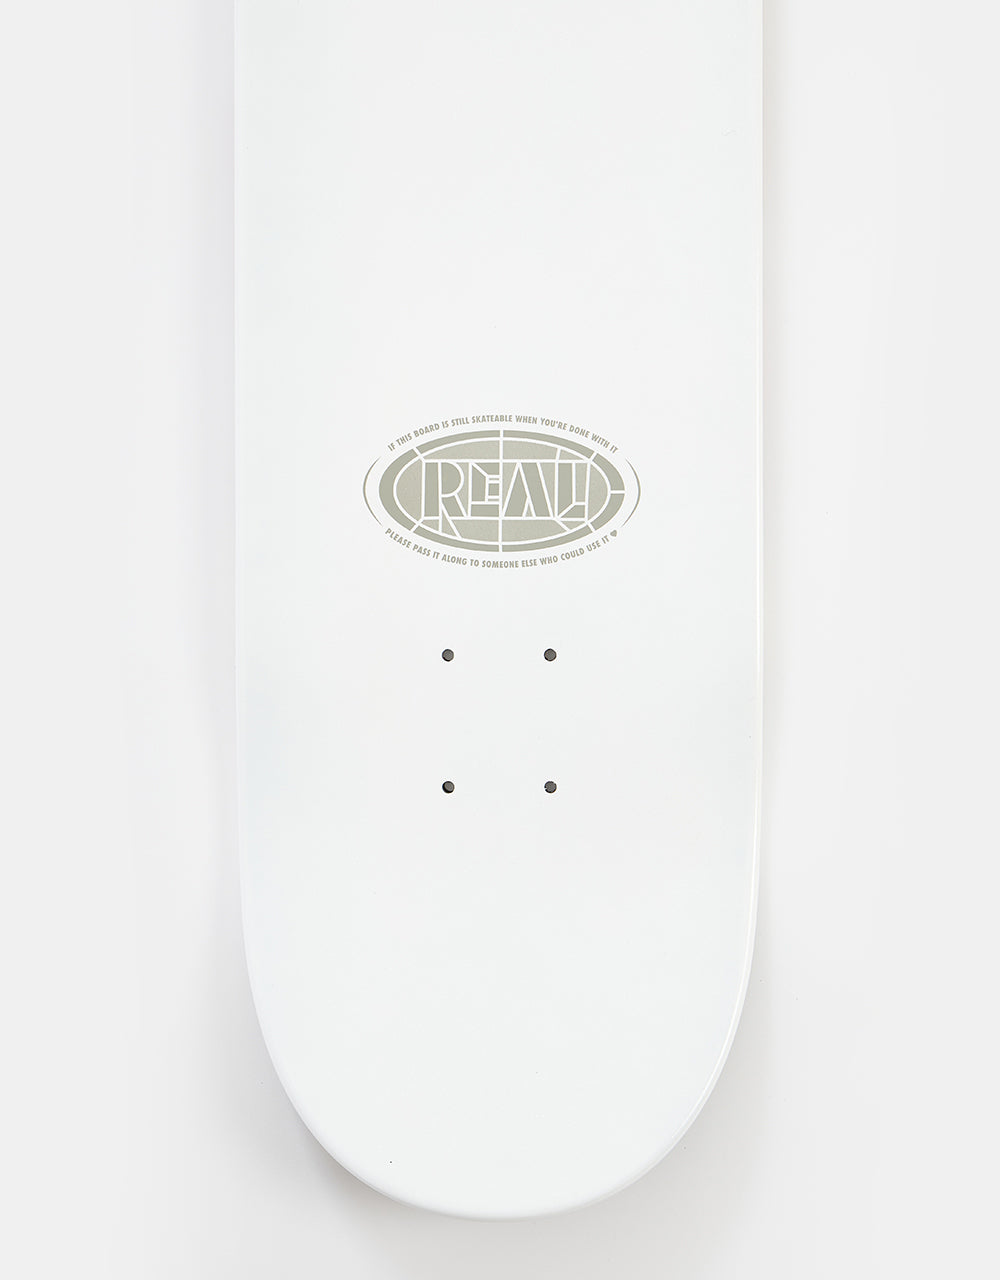 Real Oval Cathedral Skateboard Deck - 8.25"